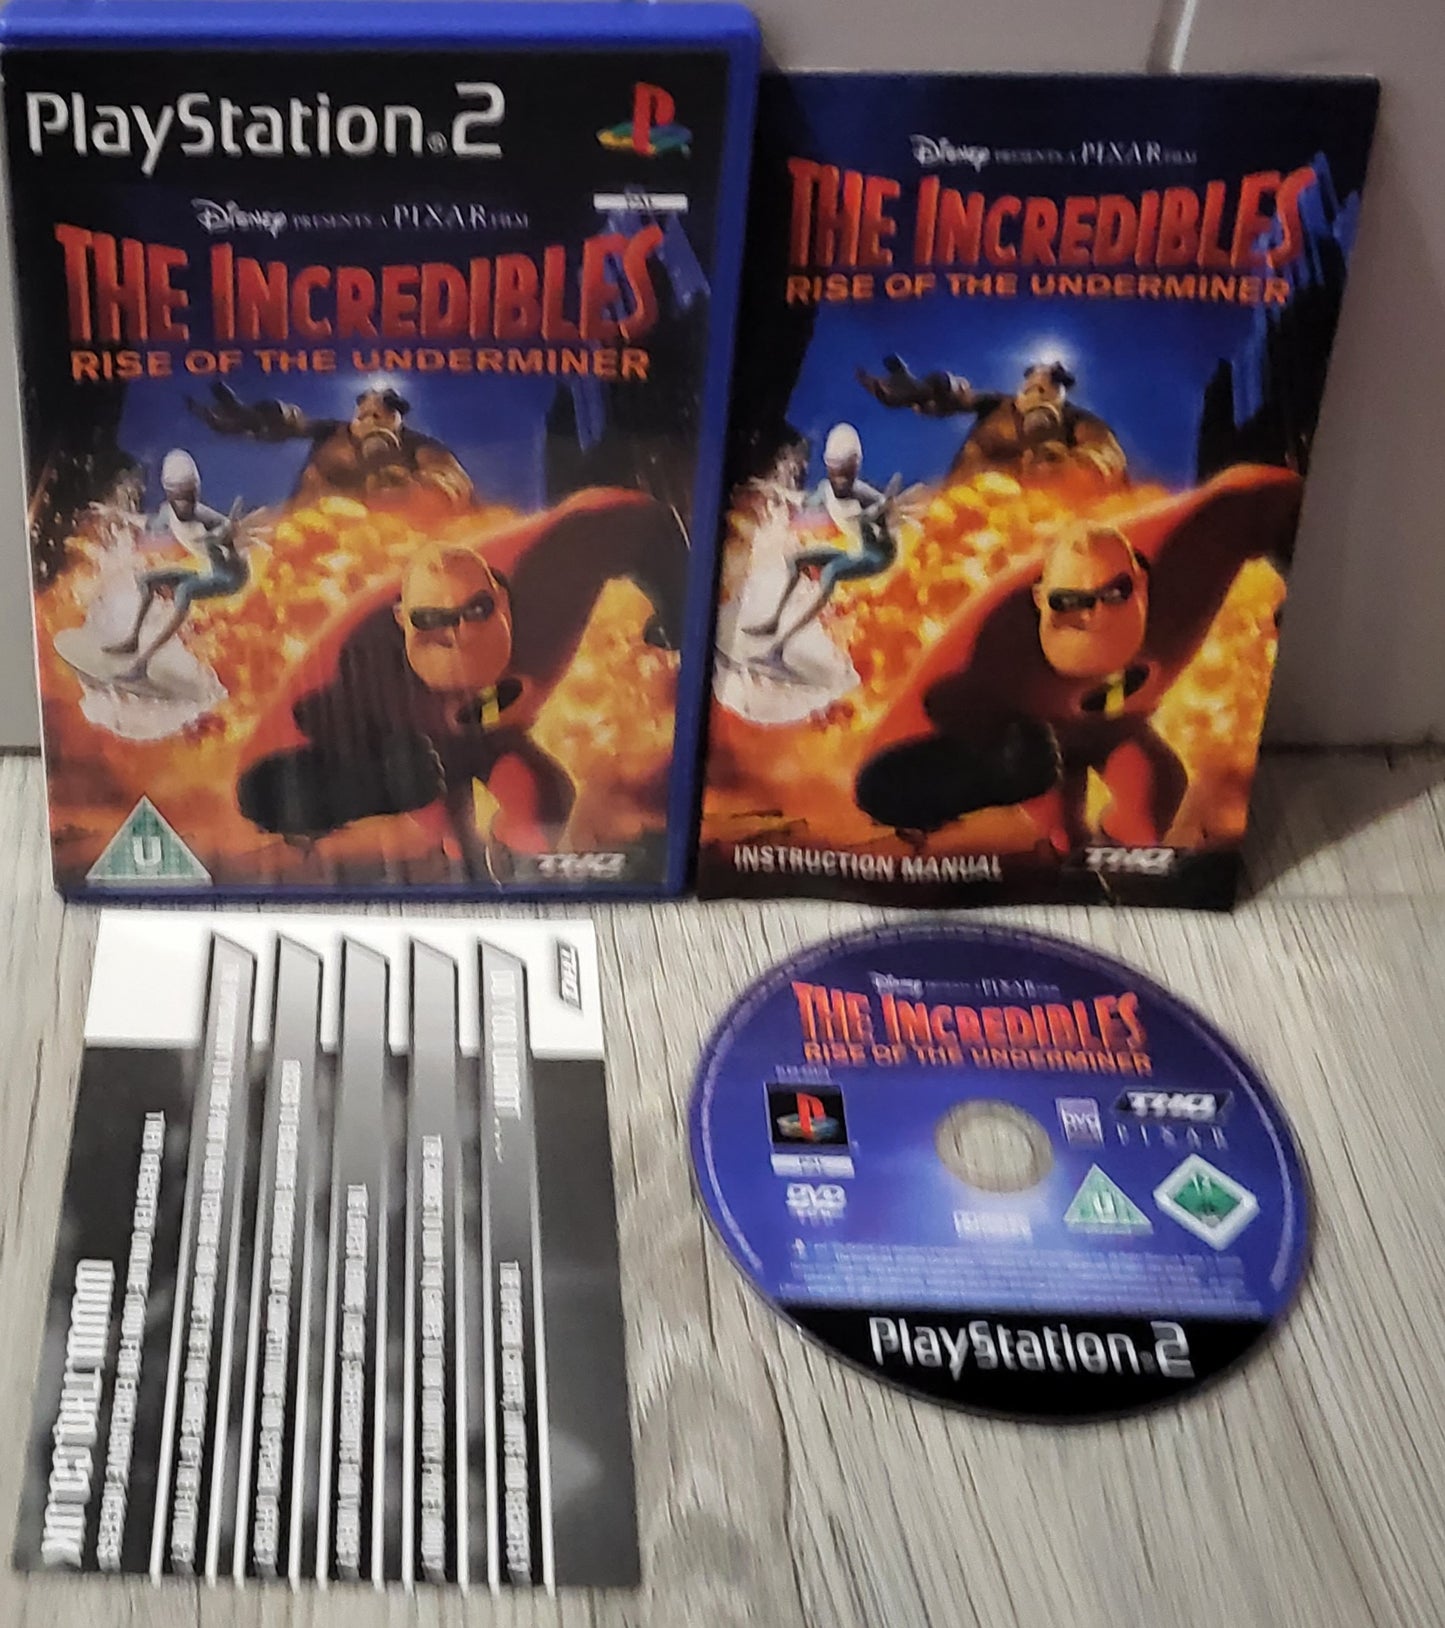 The Incredibles Rise of the Underminer Sony Playstation 2 (PS2) Game